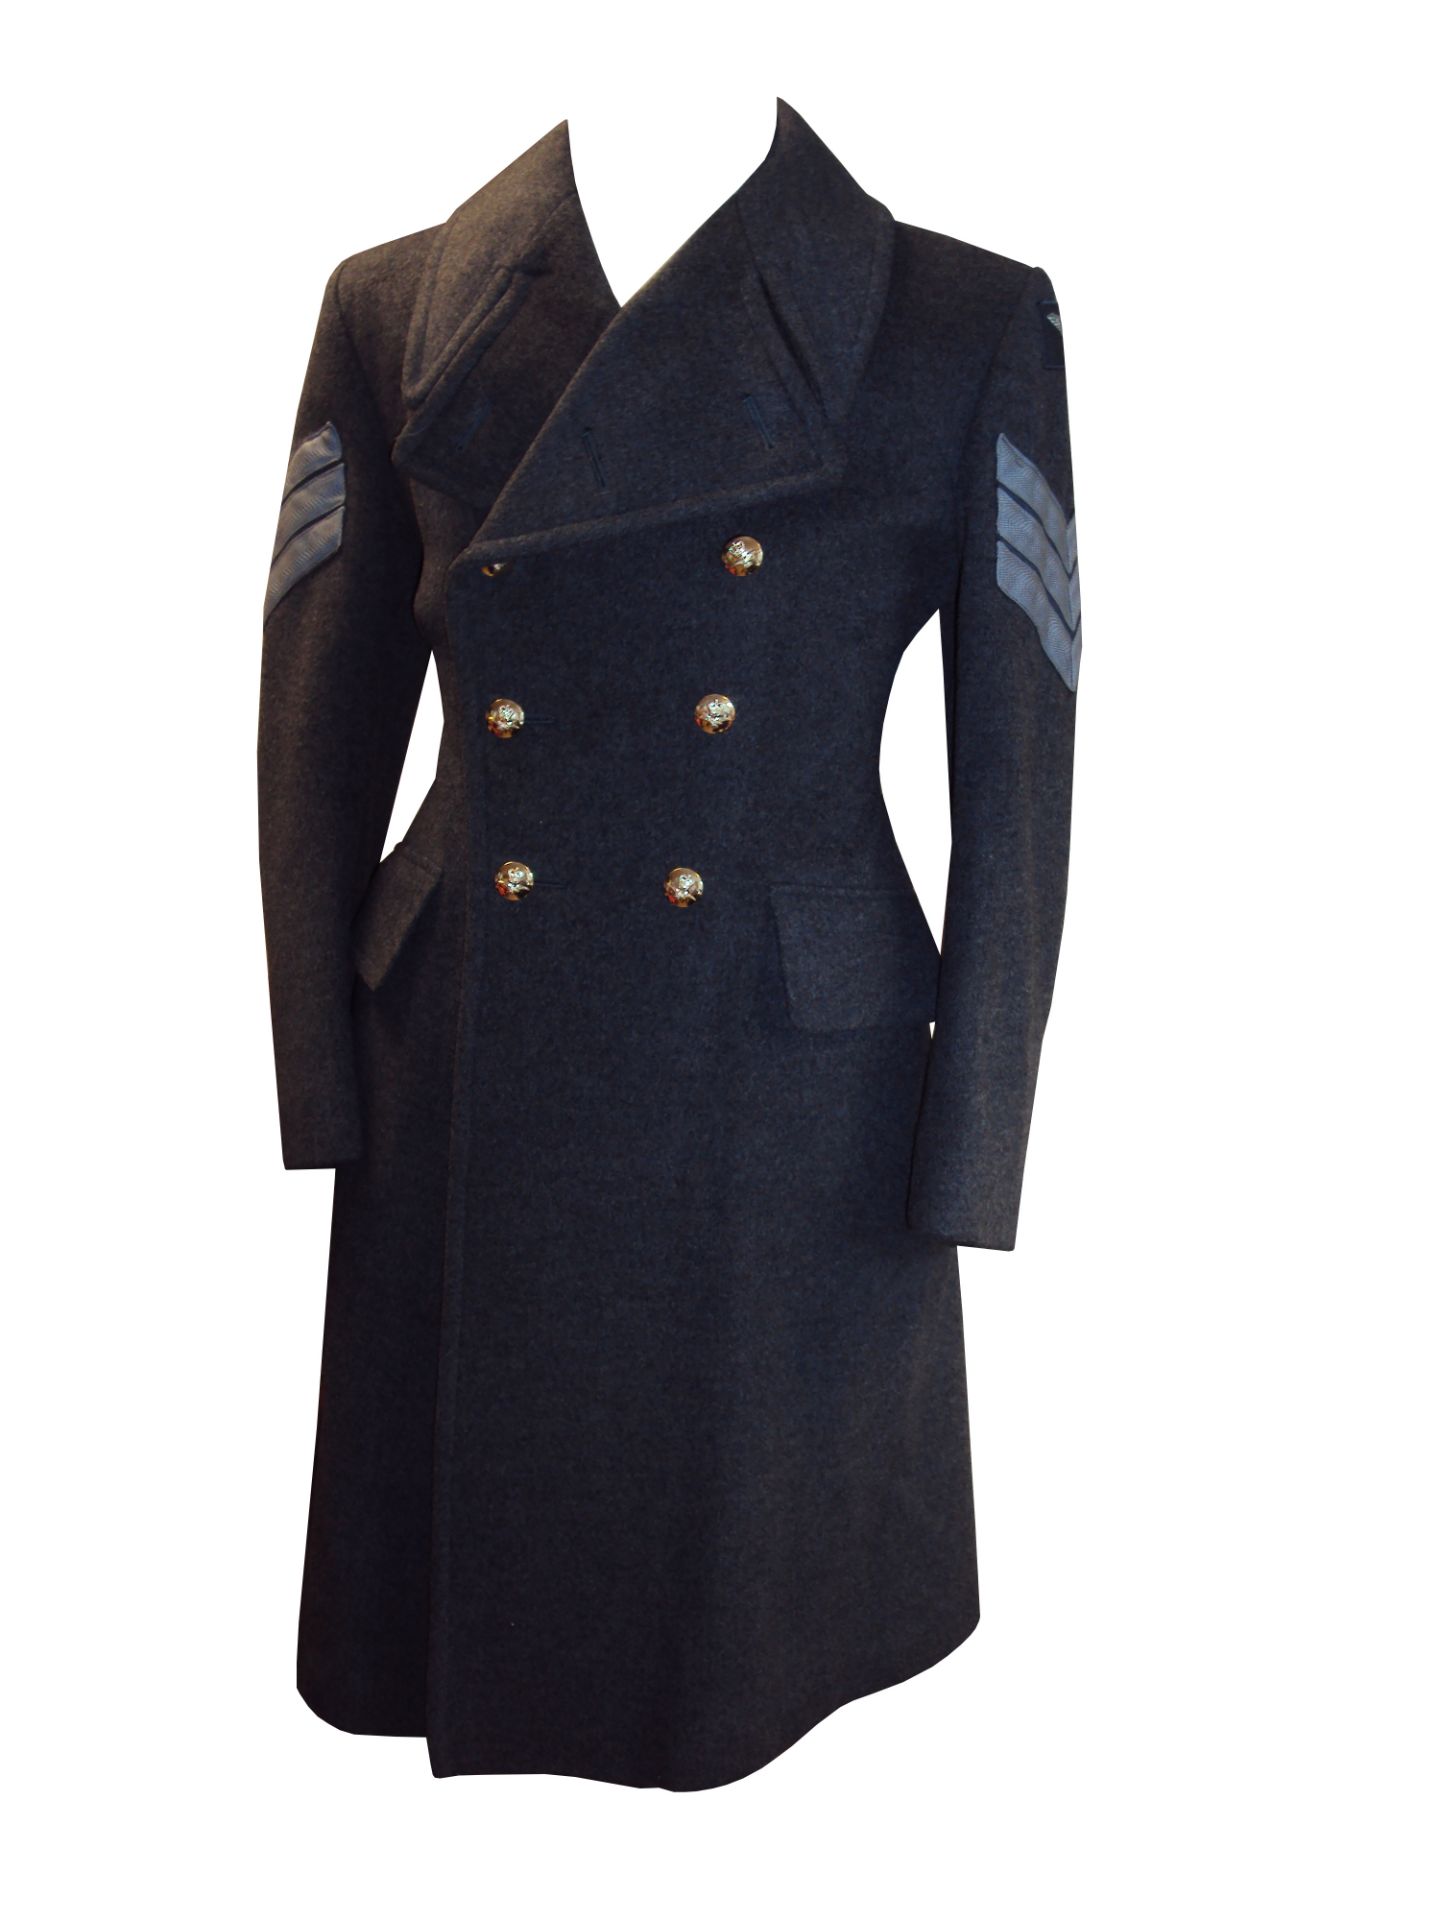 Royal Air Force Greatcoat - 40" Chest - Grade 1 Condition